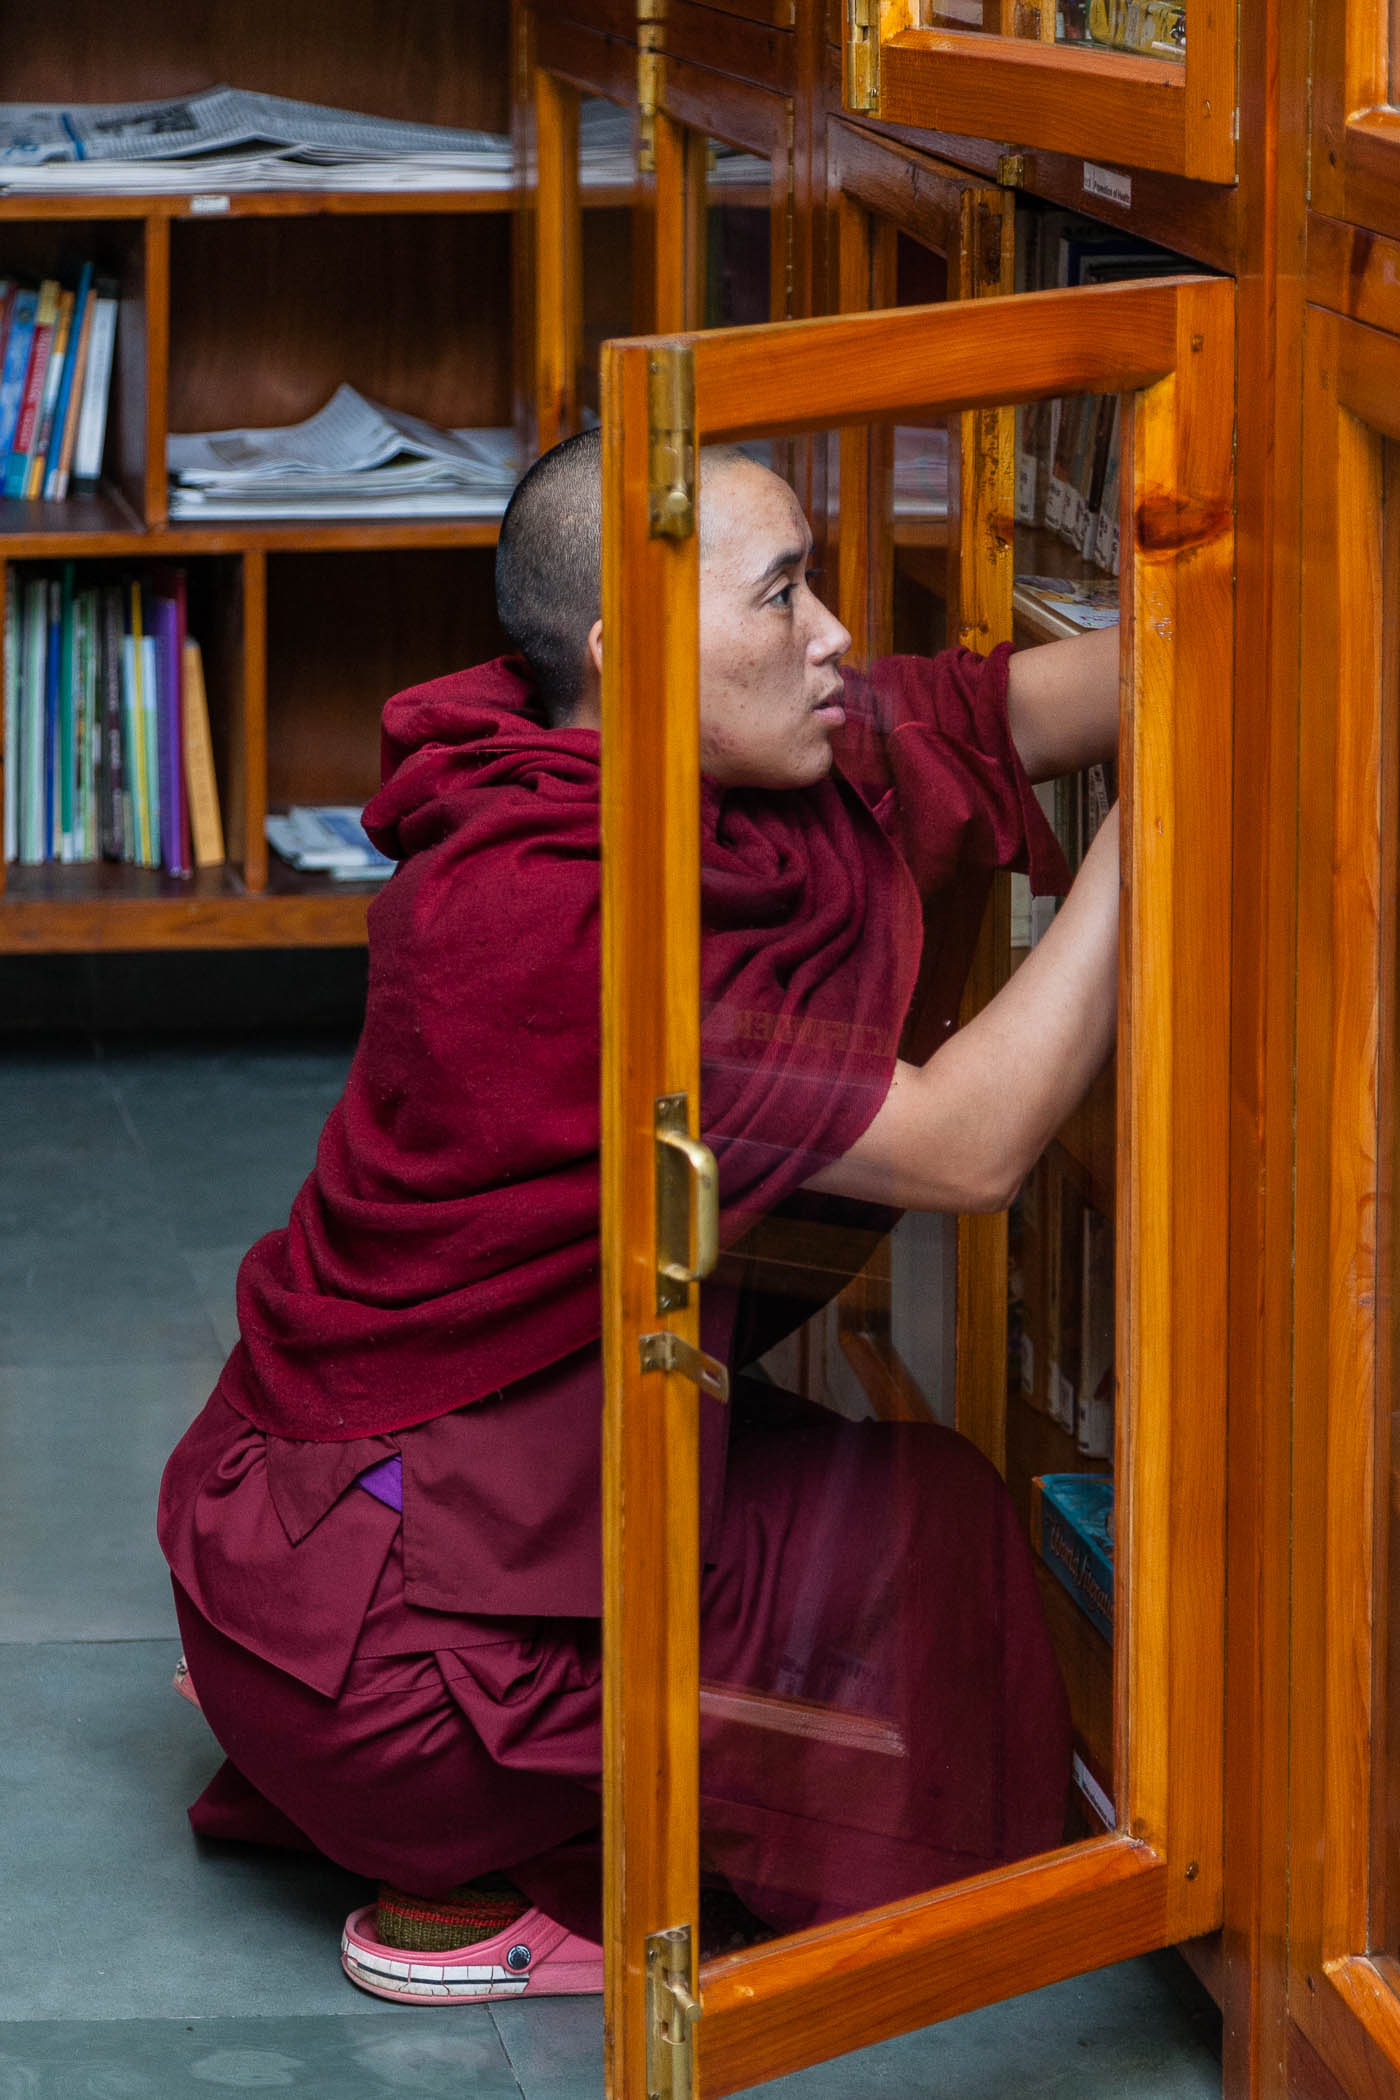 Searching the case for Tibetan texts